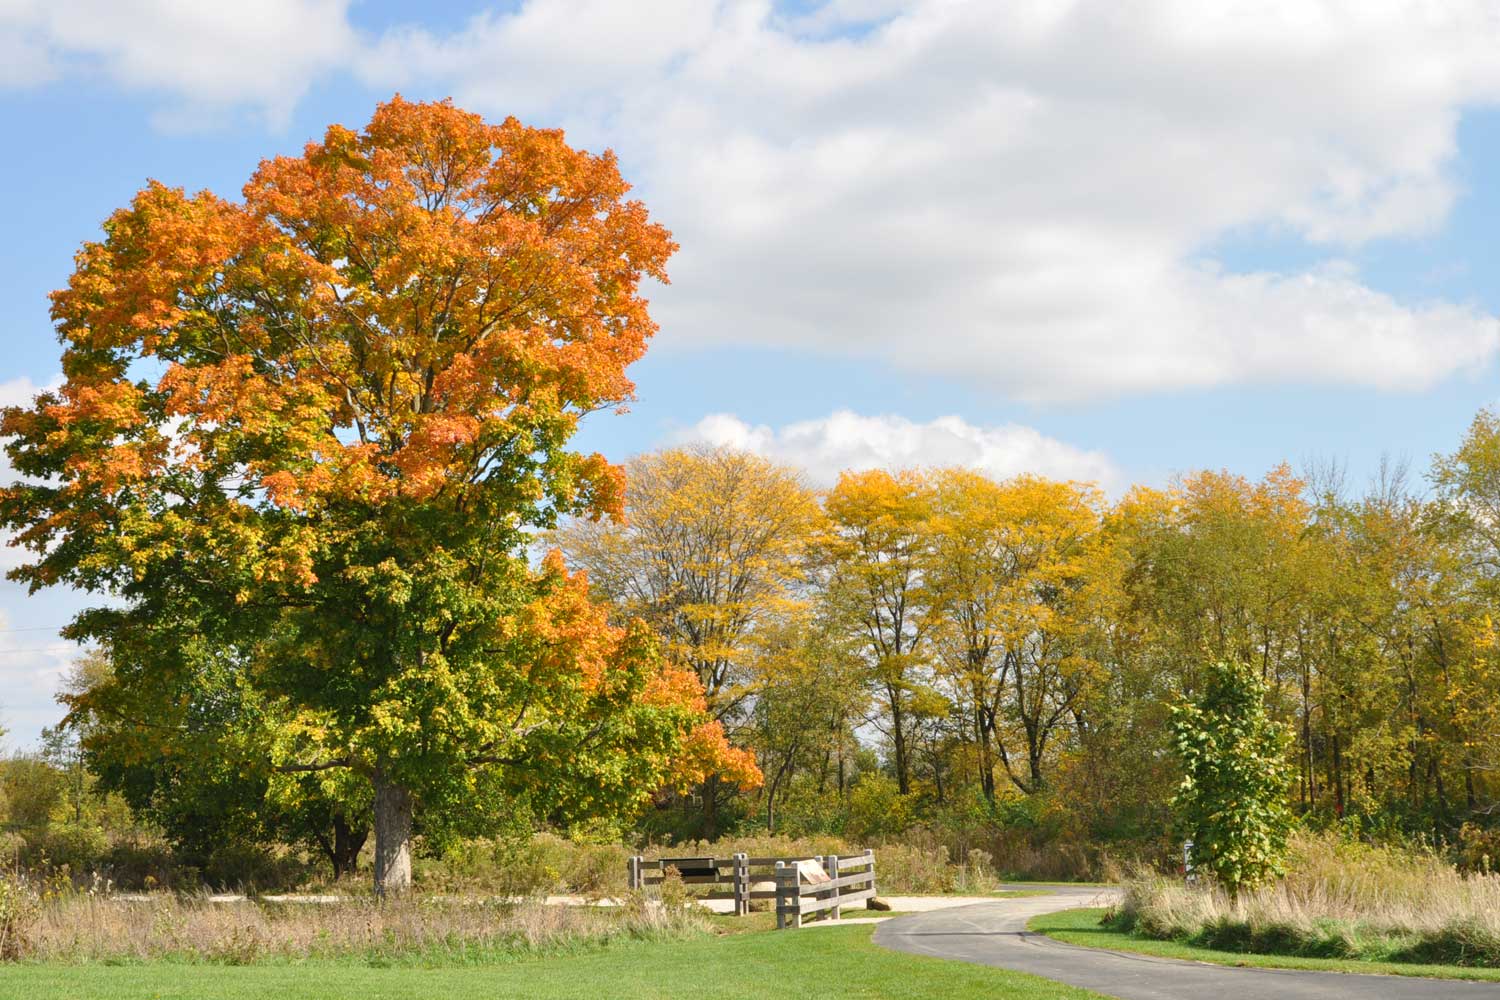 A paved trail lined by grass and trees with fall hues of yellow and orange.